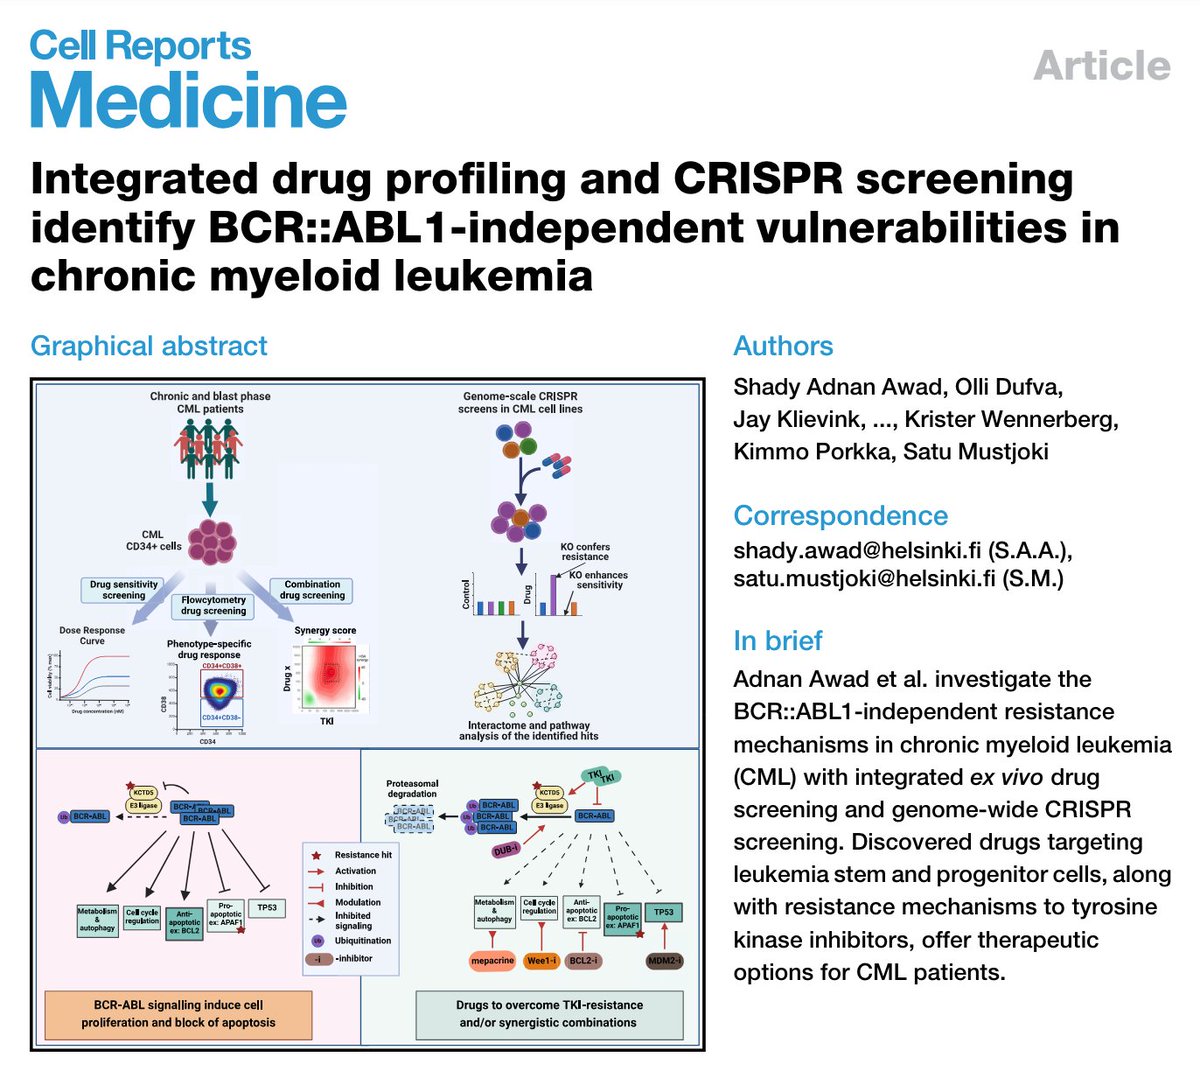 Happy to share that our work on identifying efficient strategies to target the BCR::ABL1 independent pathways in chronic myeloid leukemia is now out in @CellRepMed Aricle: cell.com/cell-reports-m… 1/